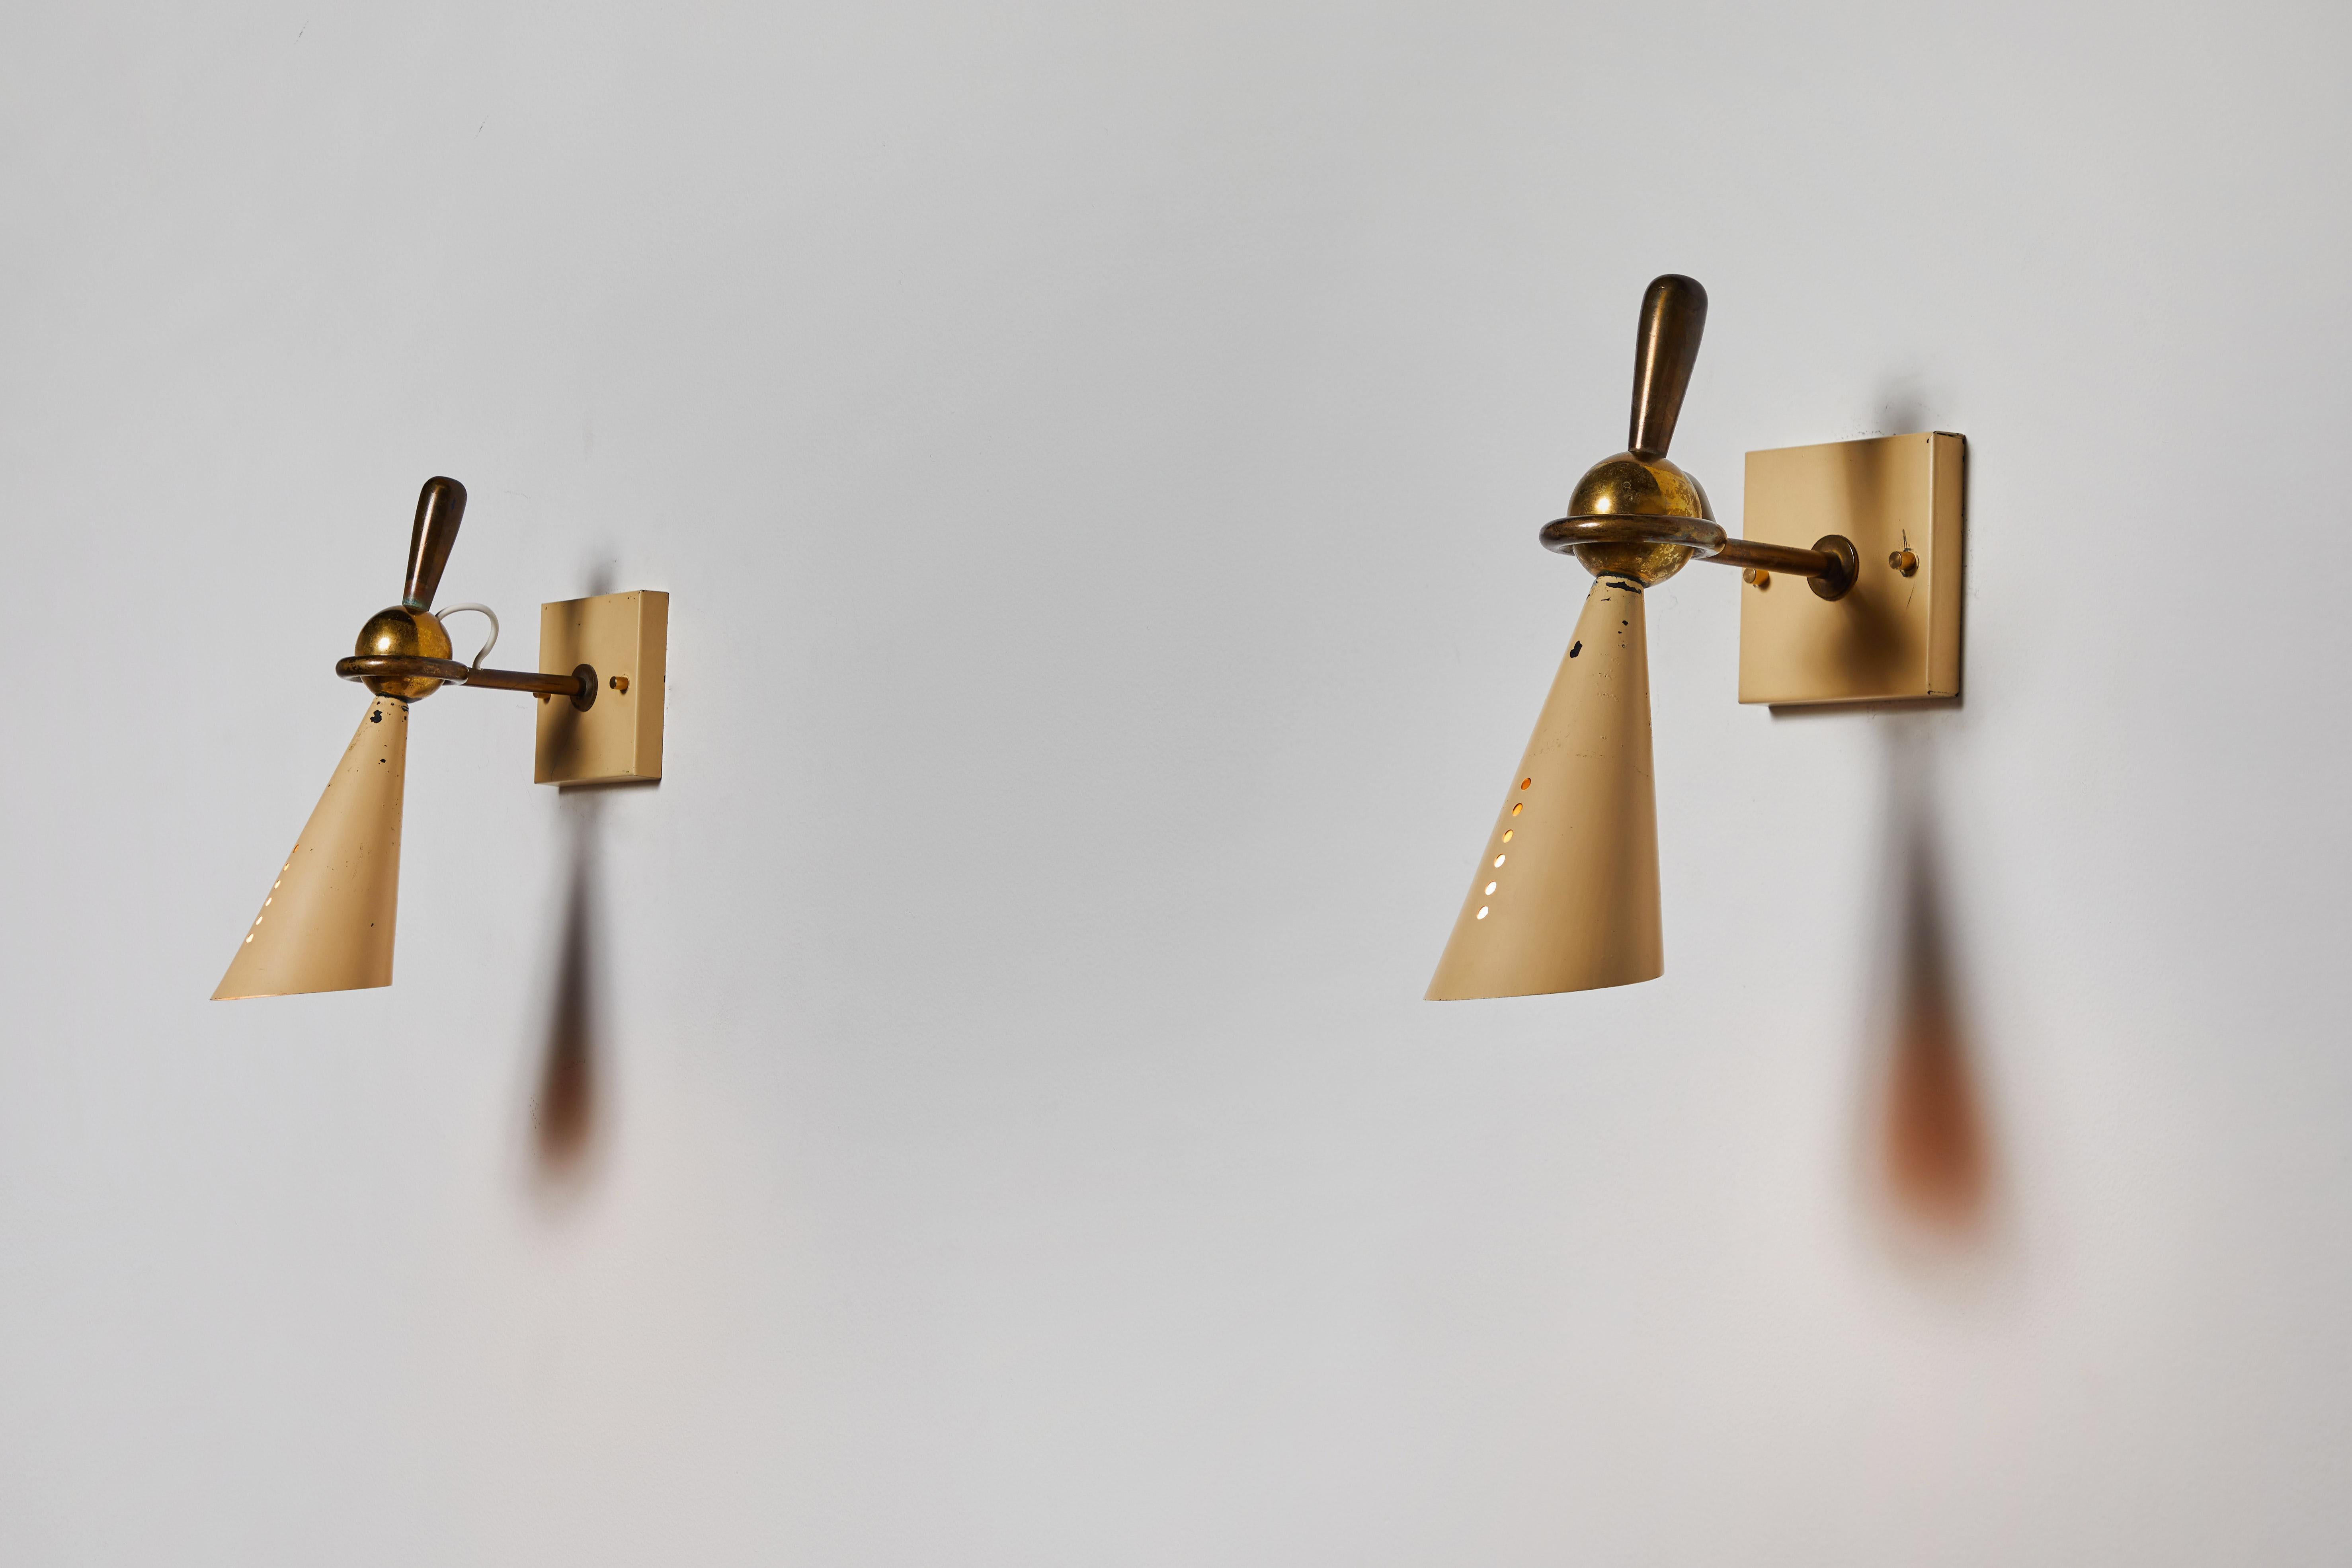 Pair of Sconces by Greco. Manufactured in Italy circa 1950s. Enameled metal and brass. Original backplates. Rewired for U.S. junction boxes. Sconces articulate in a circular motion by way of ball joint. Each sconce takes one E27 75w maximum bulb.